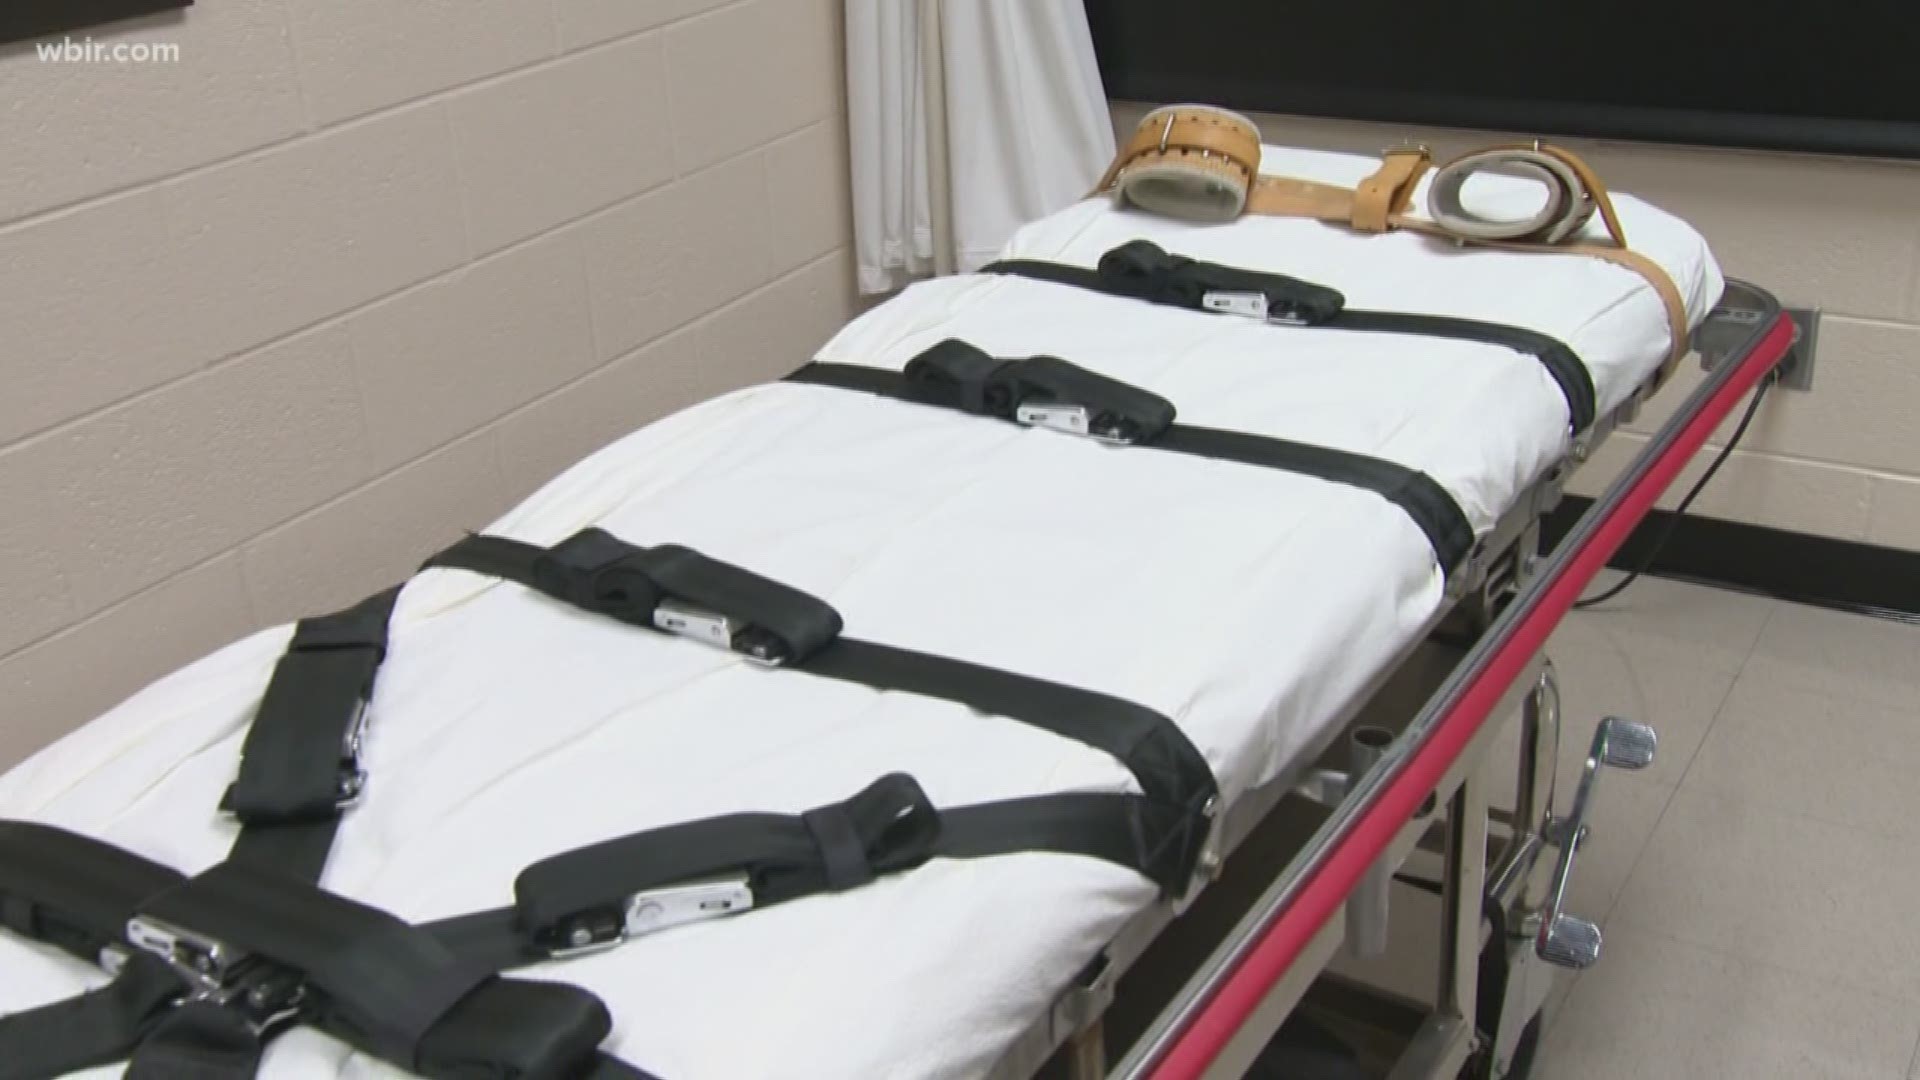 The Tennessee \Supreme Court has decided current lethal injection protocol is constitutional.